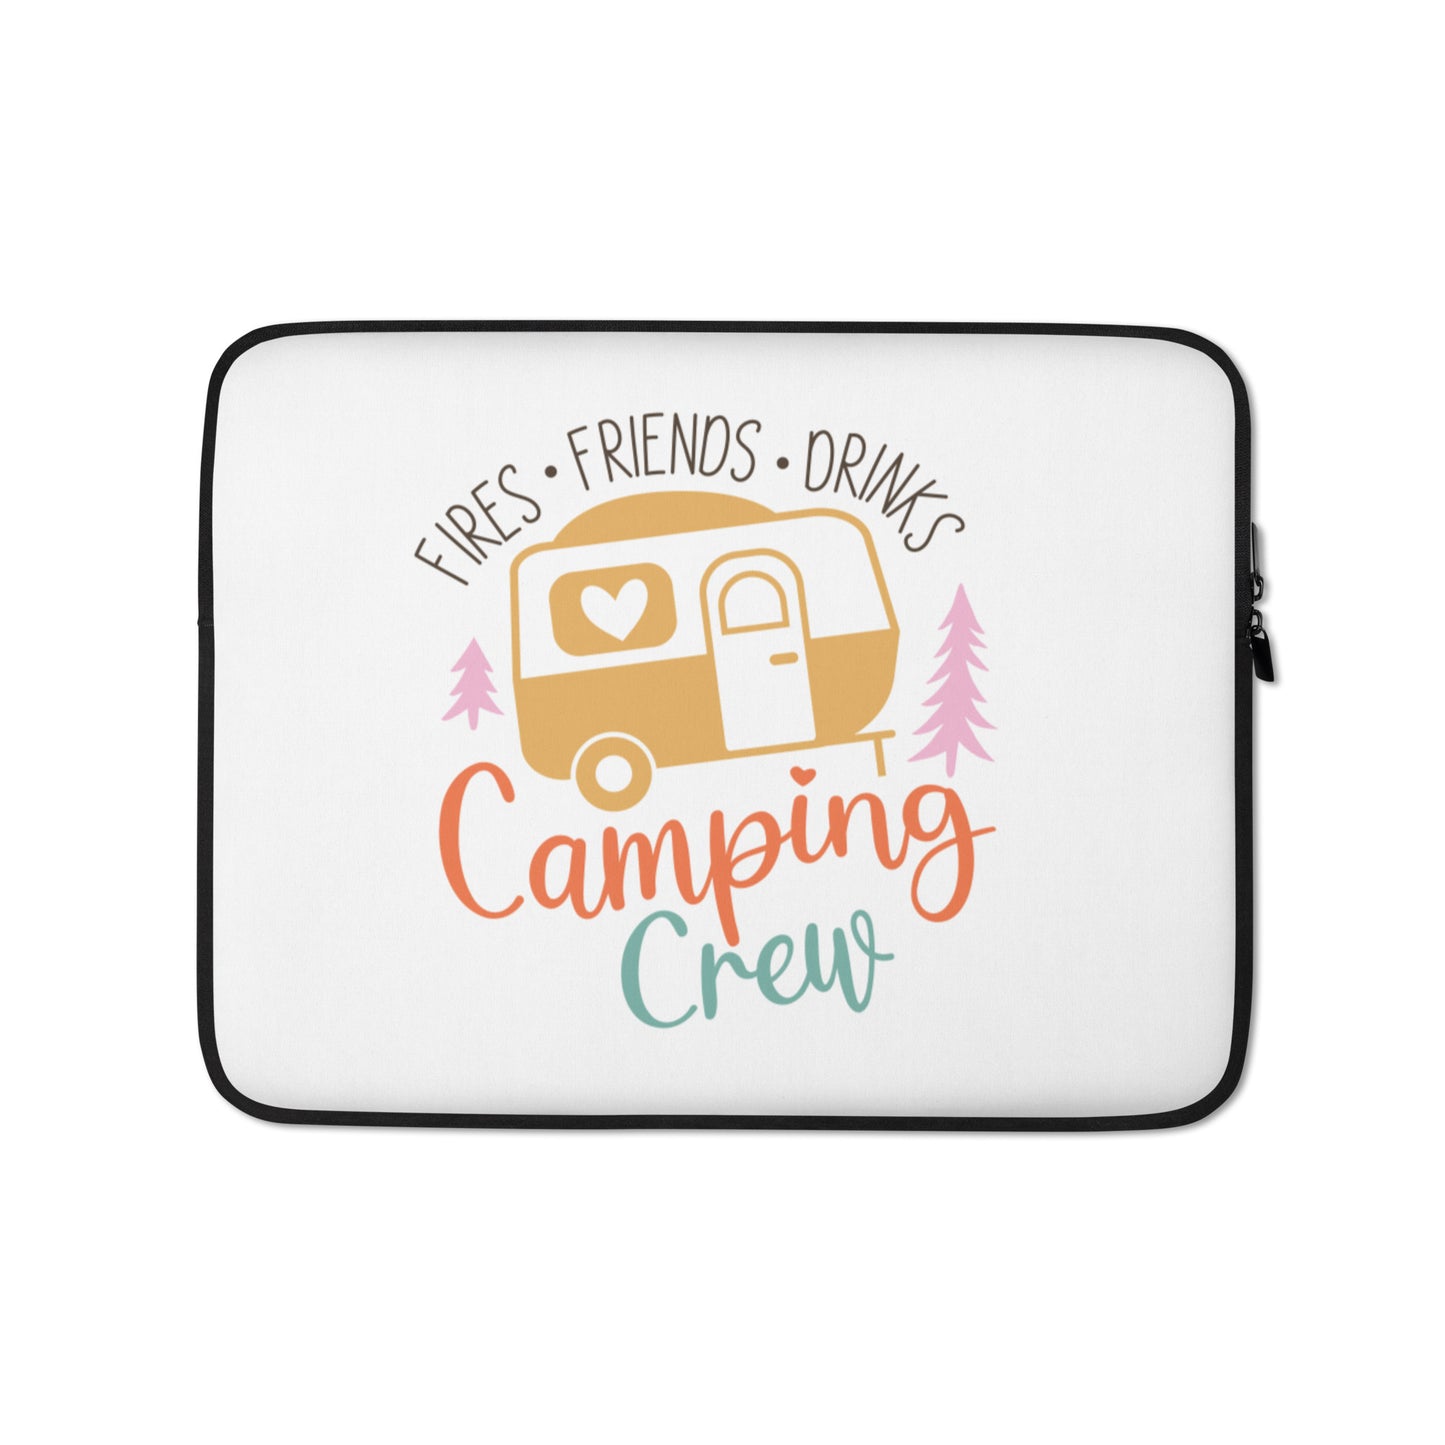 Fires Friends Drinks Camping Crew Laptop Sleeve